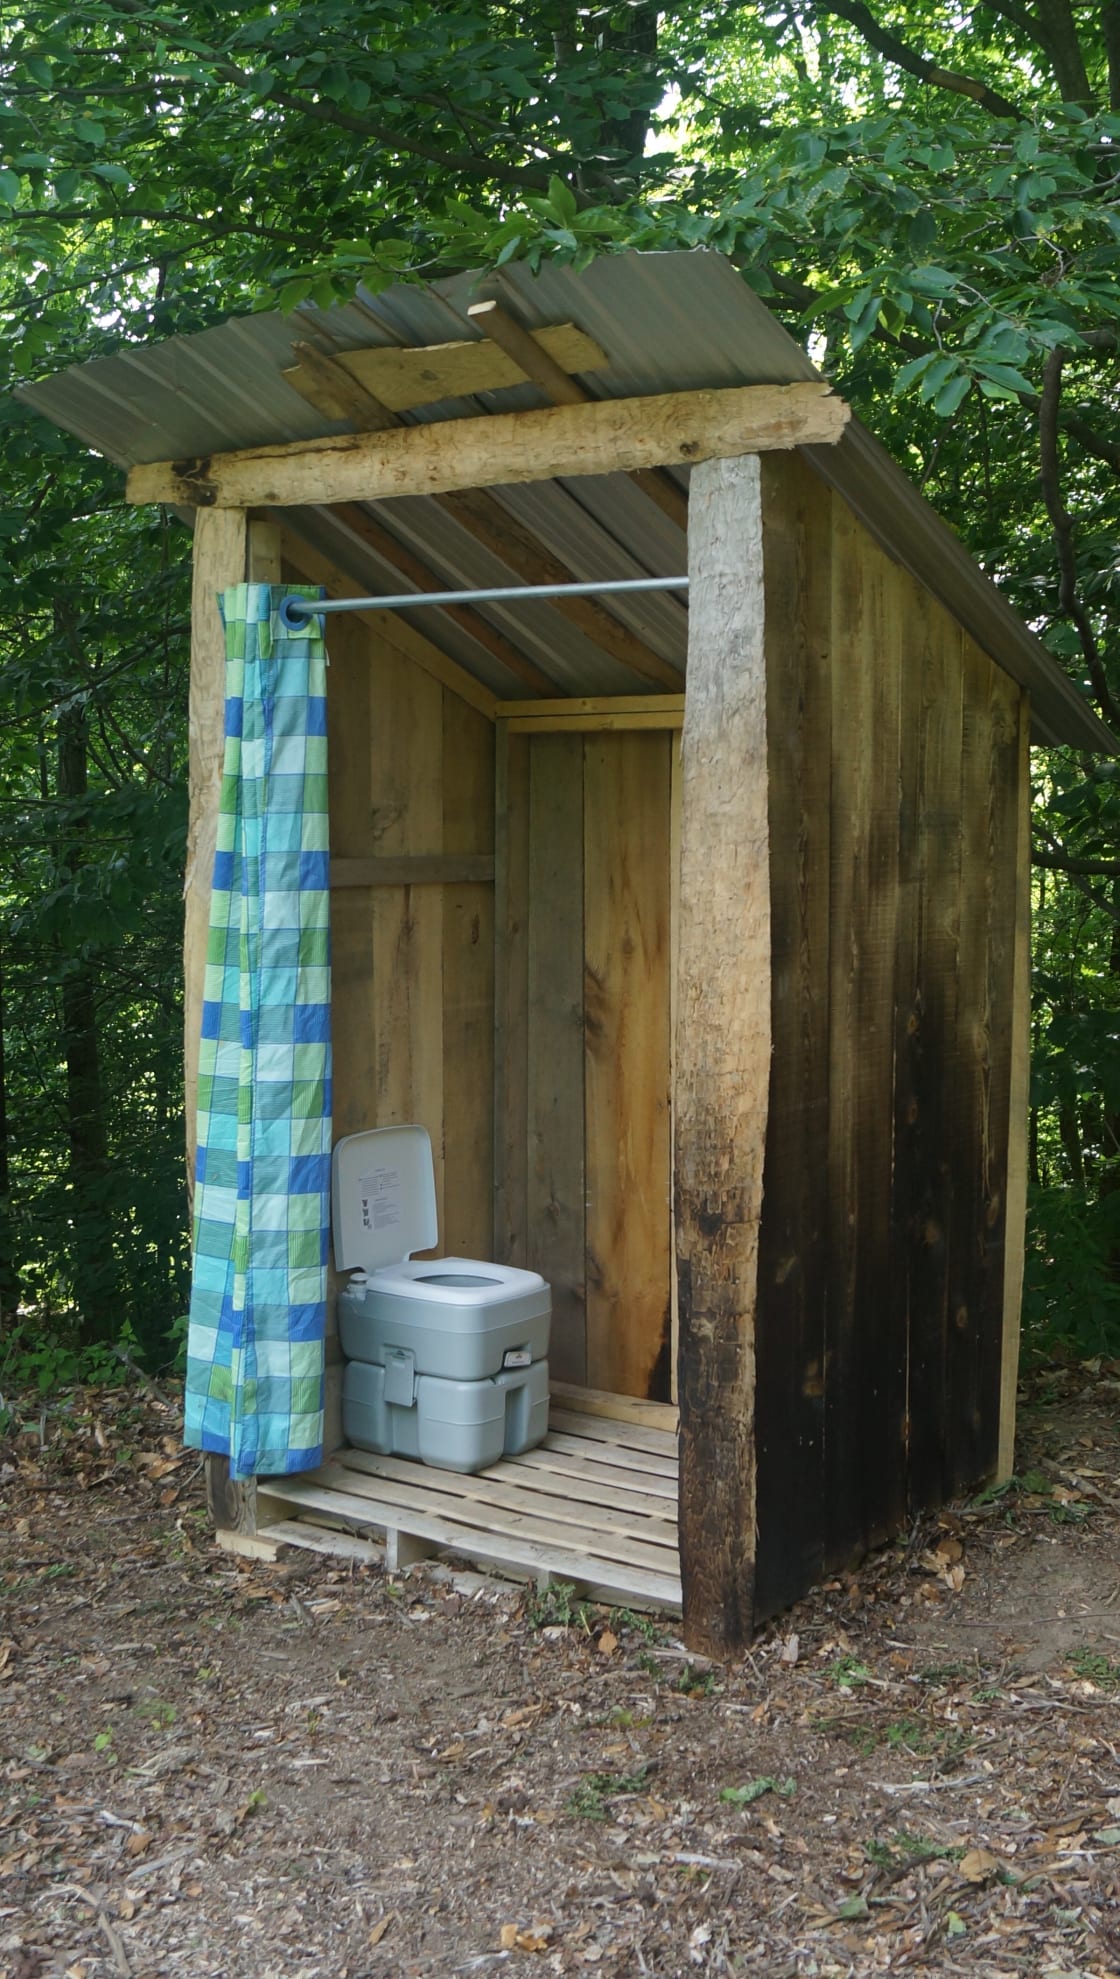 Portable toilet in outhouse